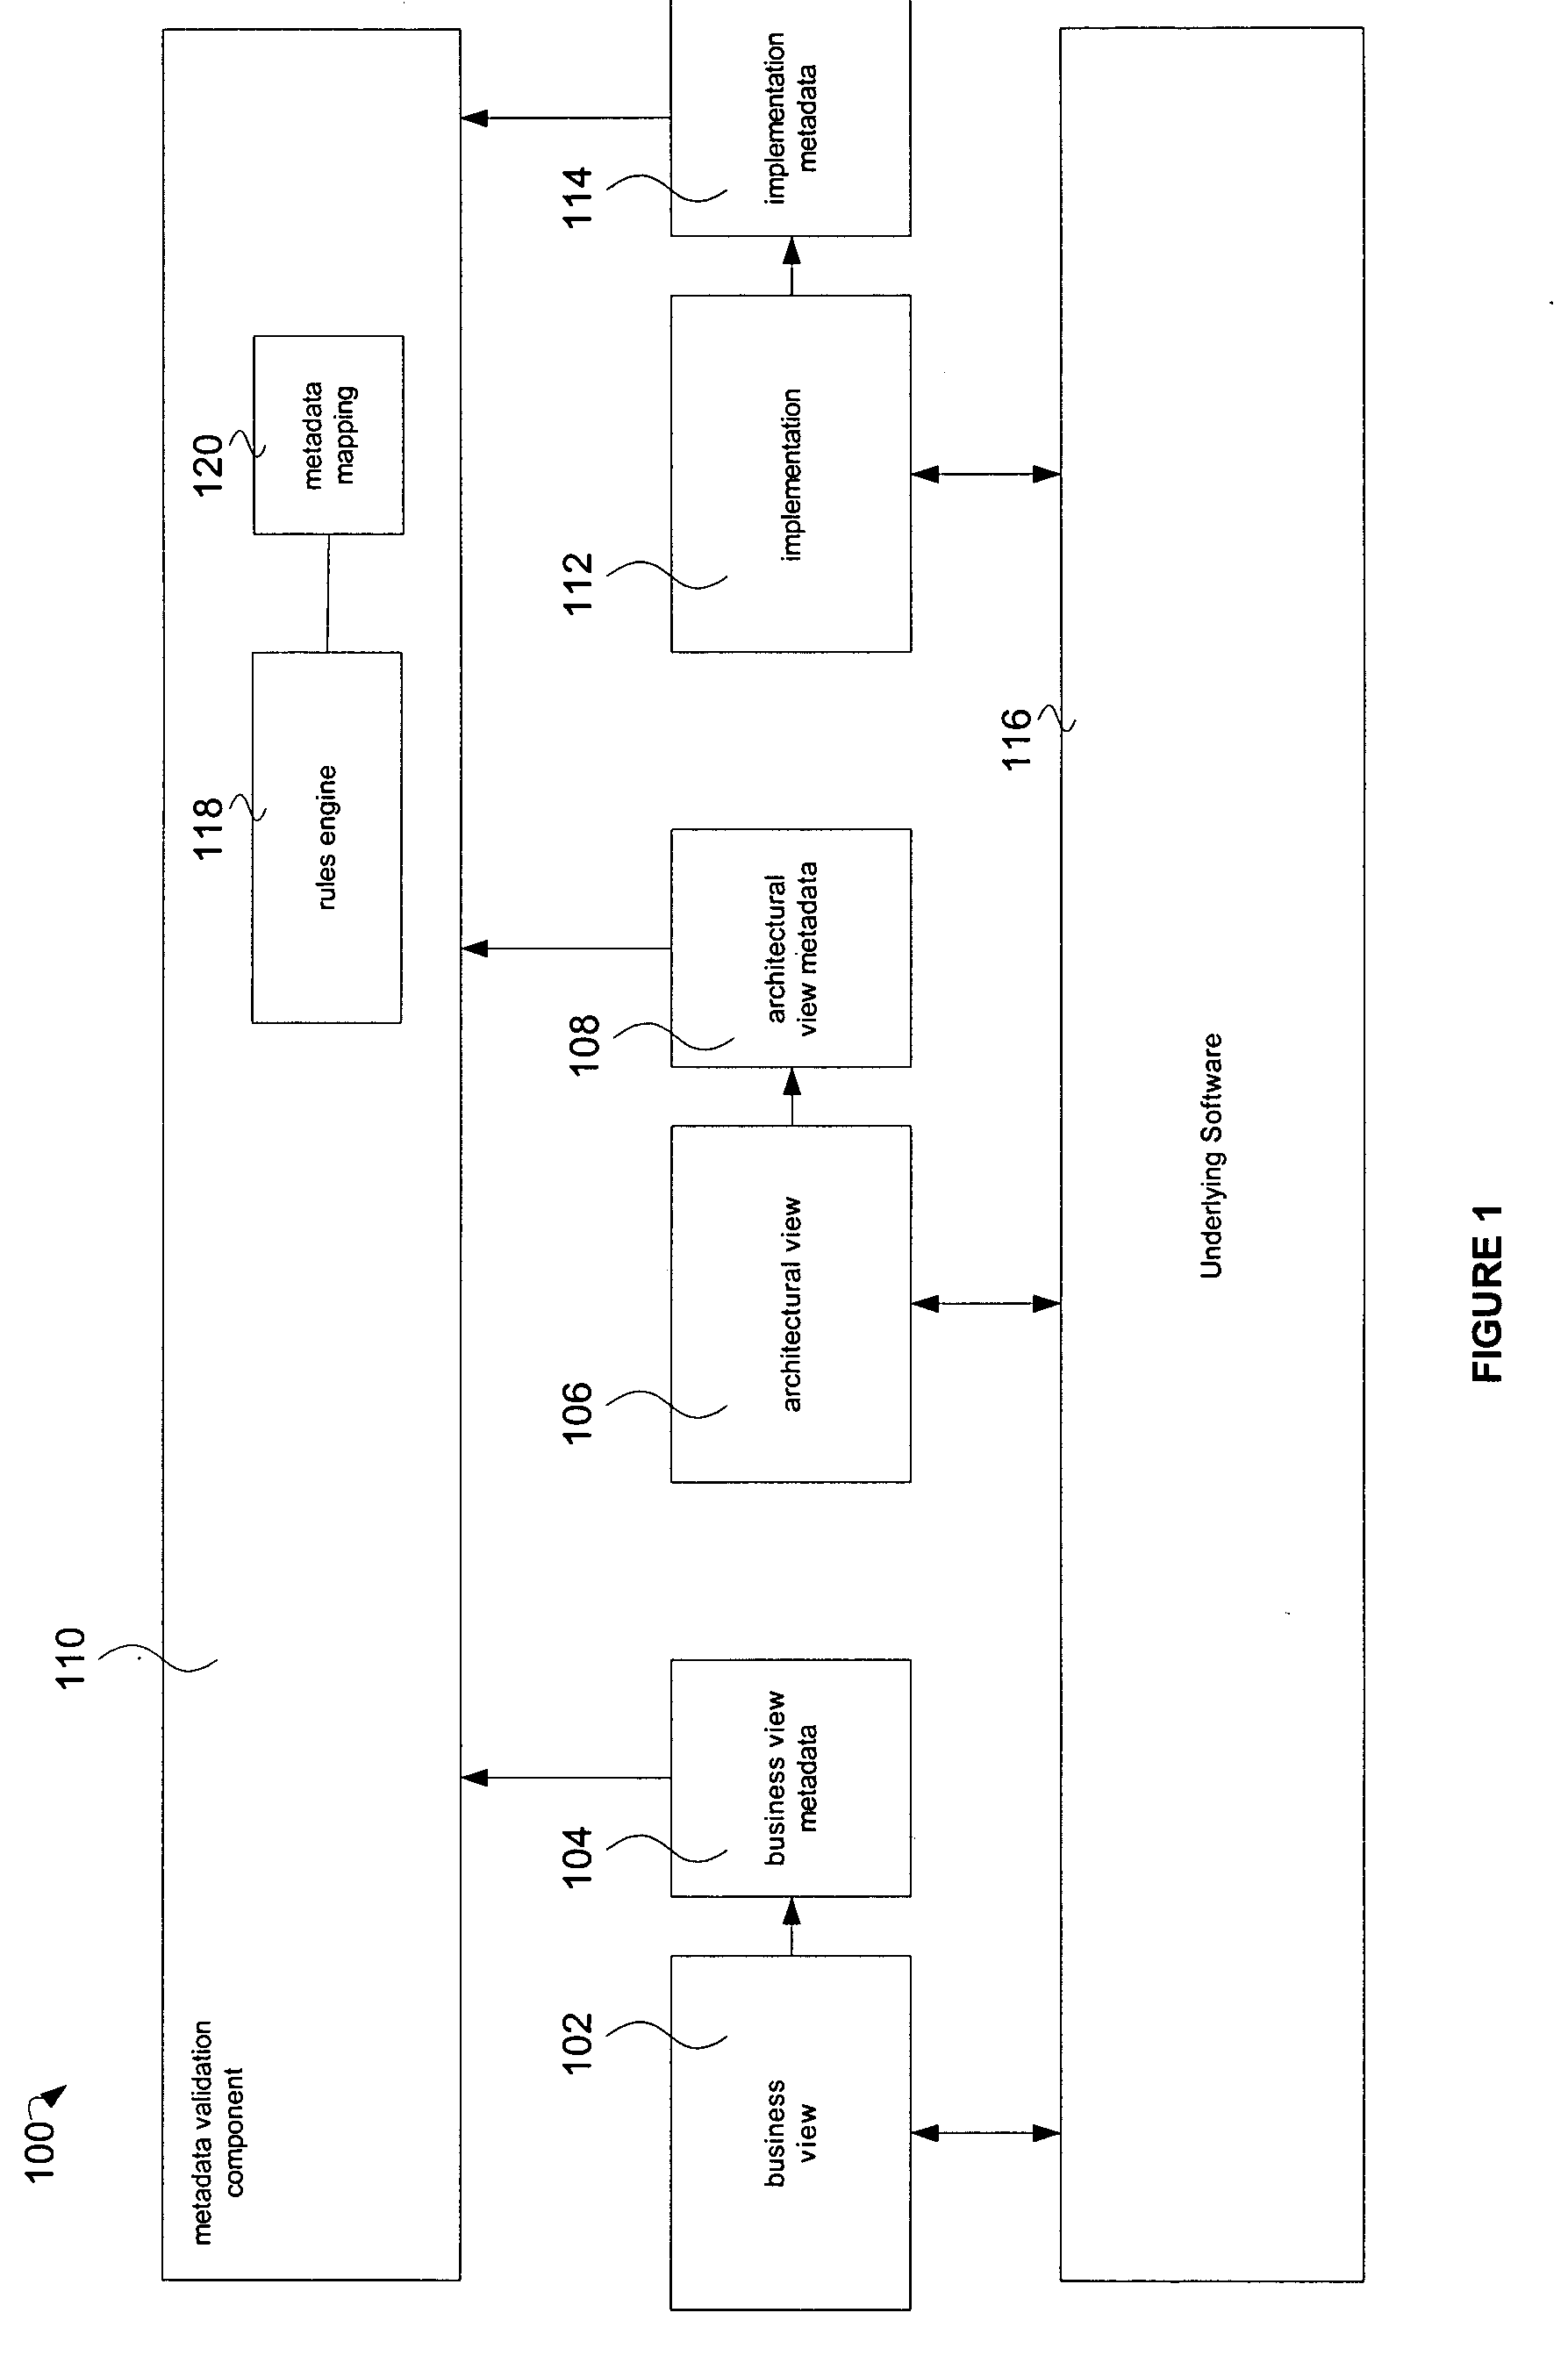 System and method of correlation and change tracking between business requirements, architectural design, and implementation of applications